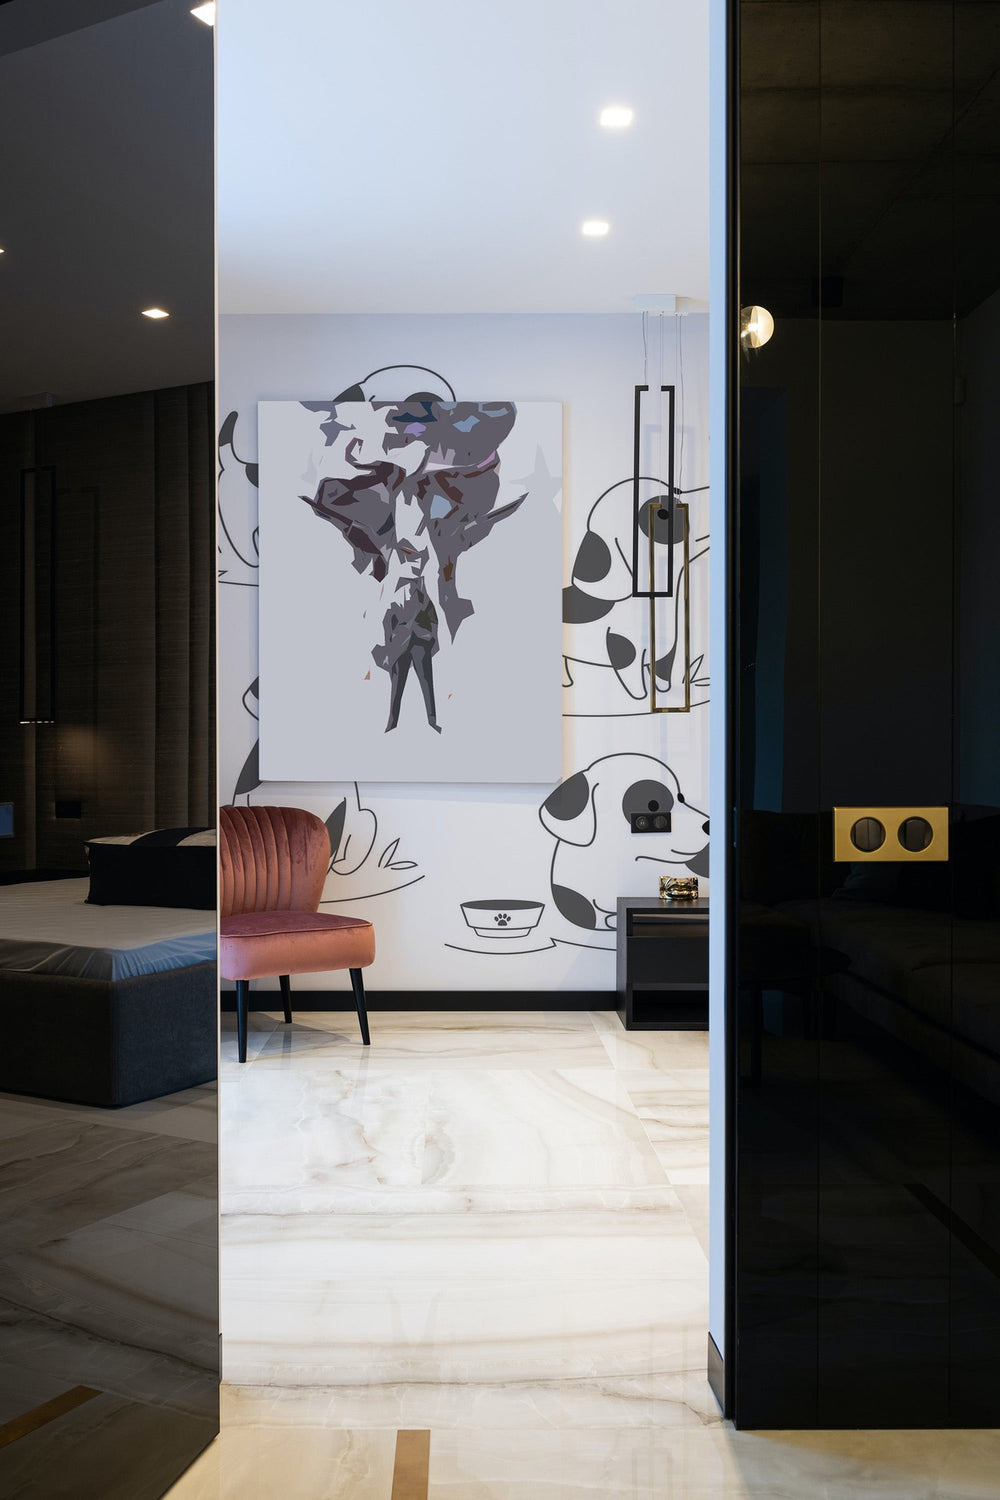 Modern interior with abstract mural on the wall, elegant furniture, and stylish design elements.